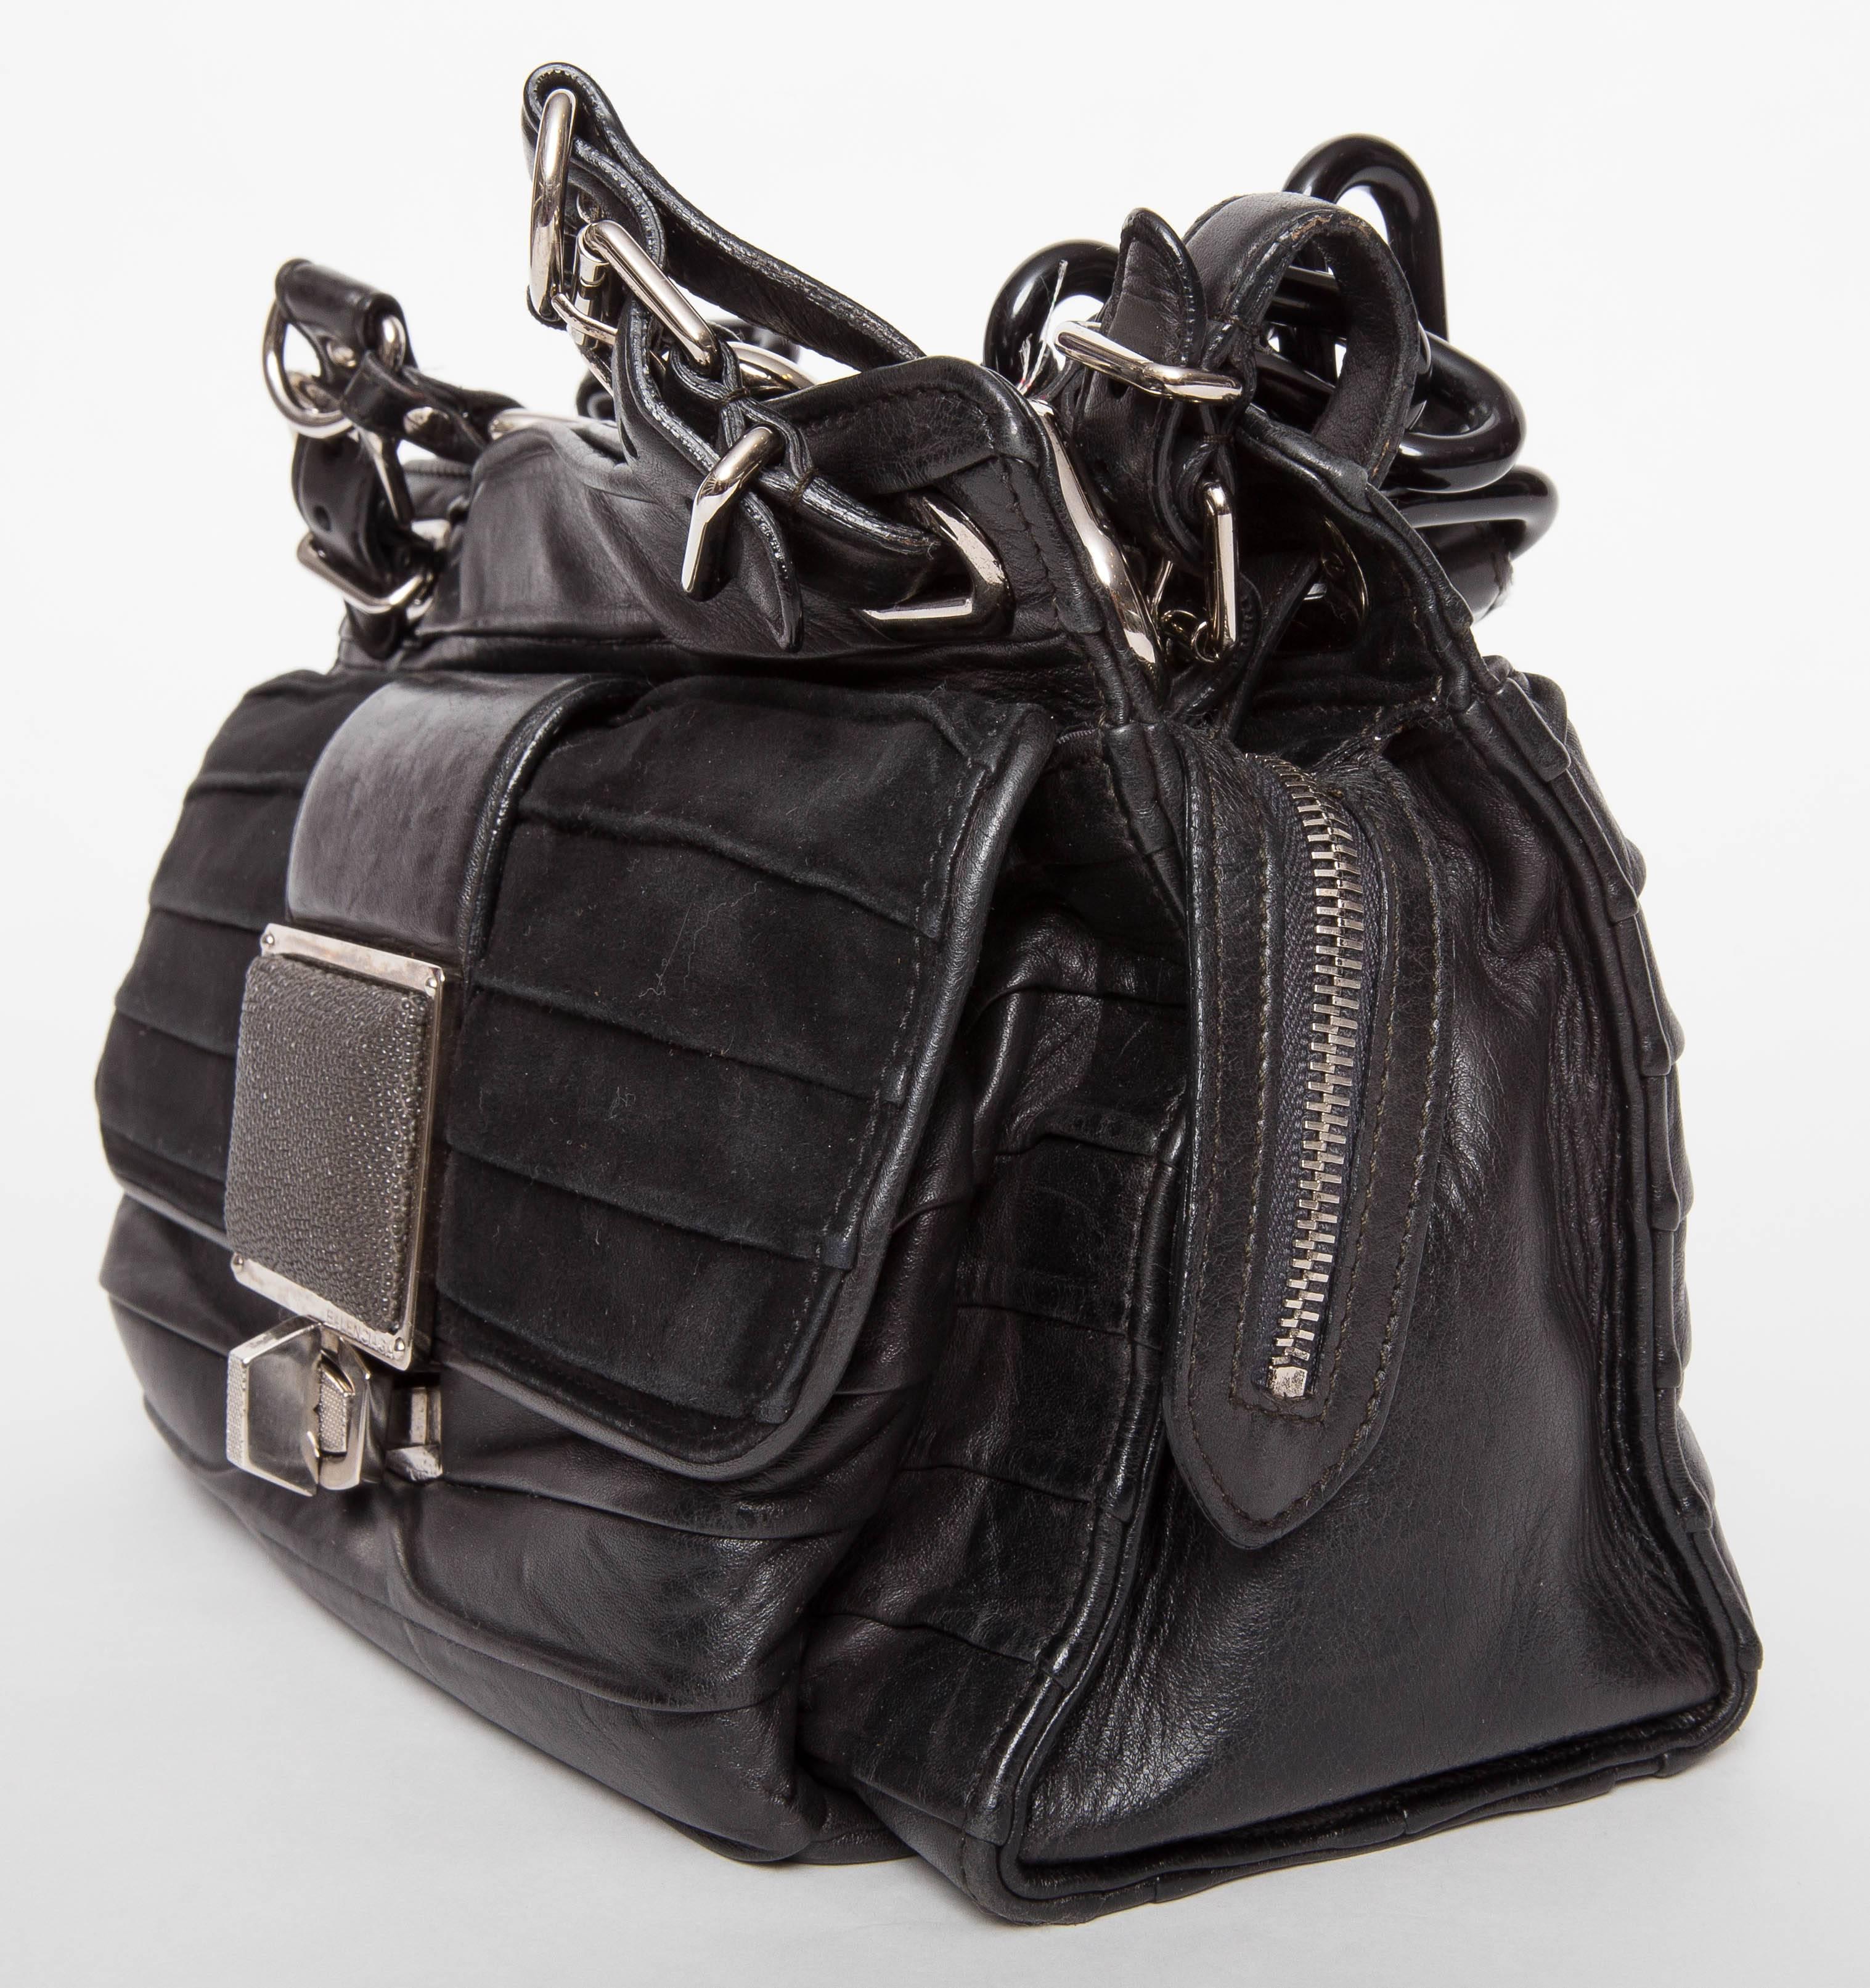 Balenciaga Cherche Midi Bag in Black leather and suede features shoulder bag with tonal stingray panel at front pocket, turn lock closure, dual resin chain link adjustable shoulder straps, silver-tone hardware, zip pocket at interior and exterior.